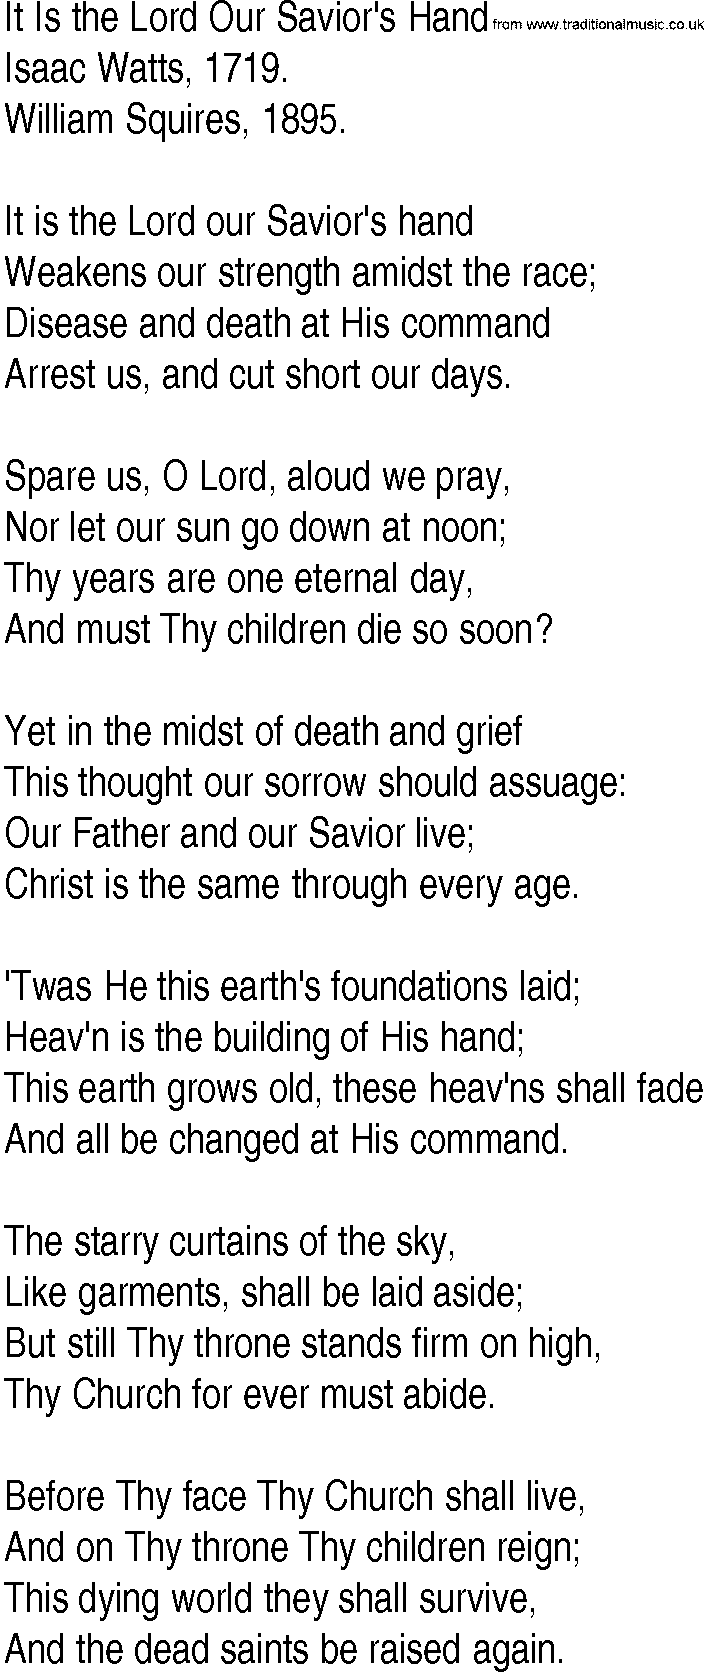 Hymn and Gospel Song: It Is the Lord Our Savior's Hand by Isaac Watts lyrics